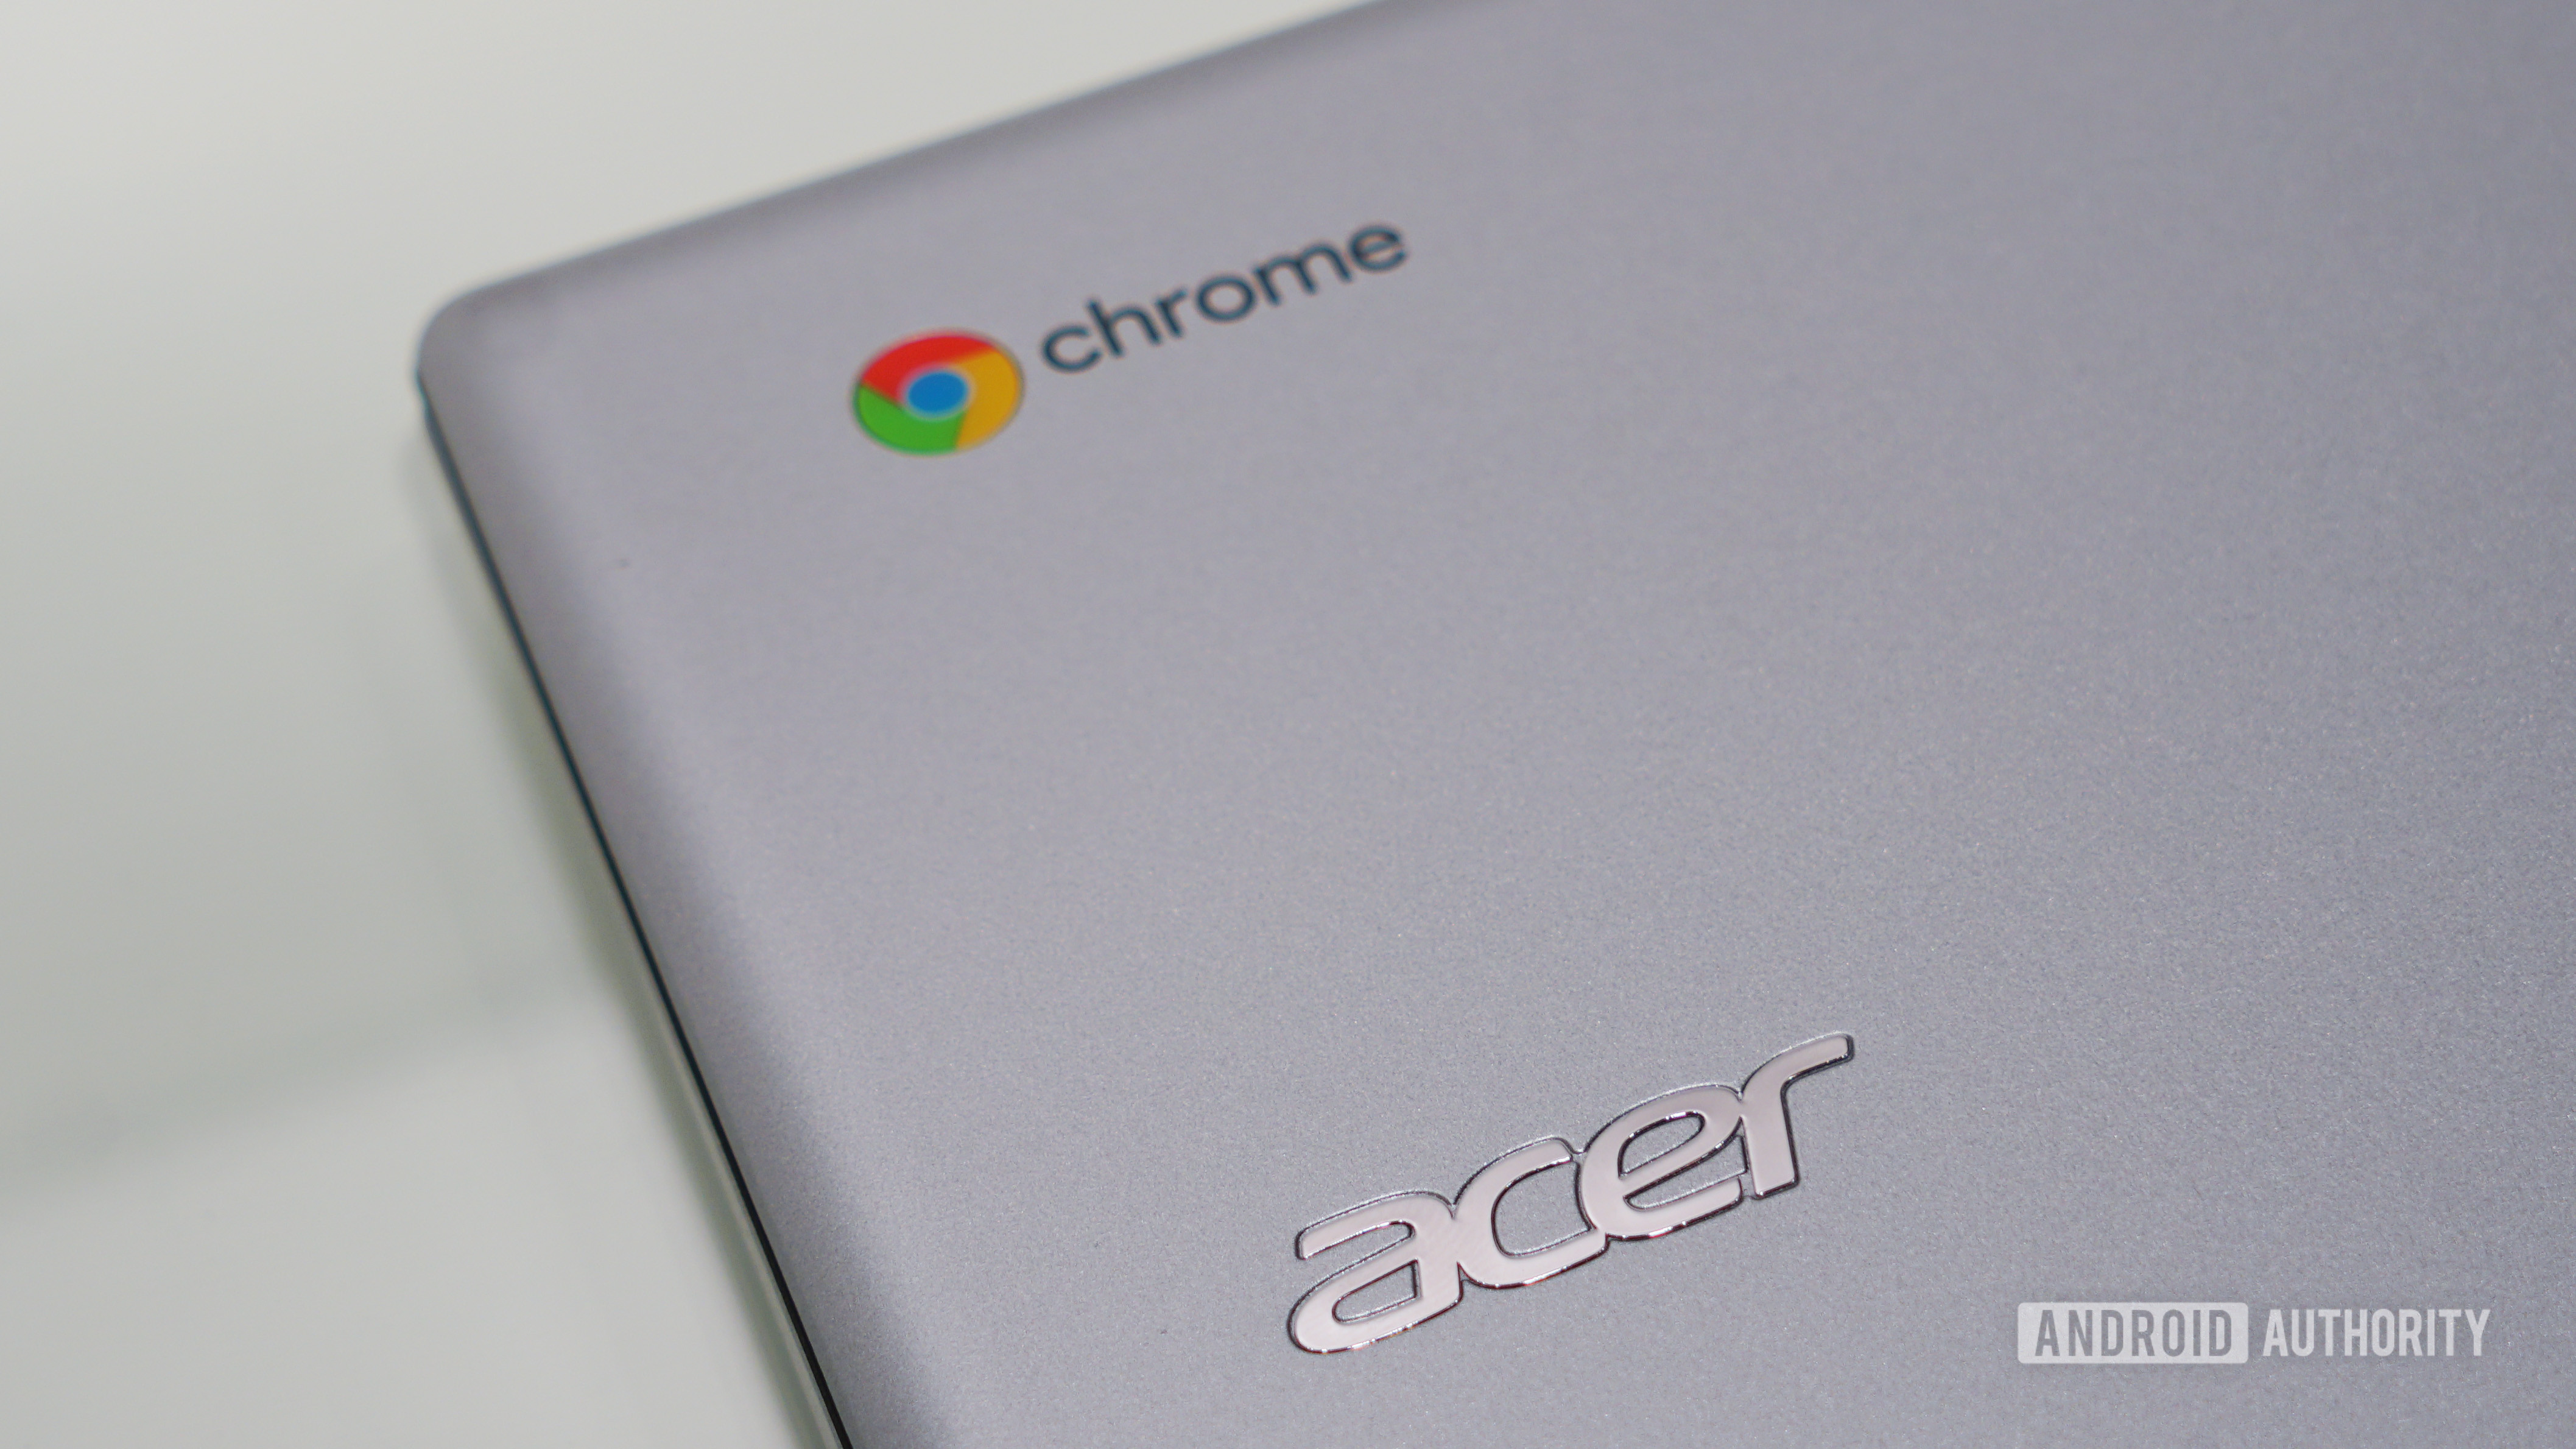 What is verified access on a Chromebook?